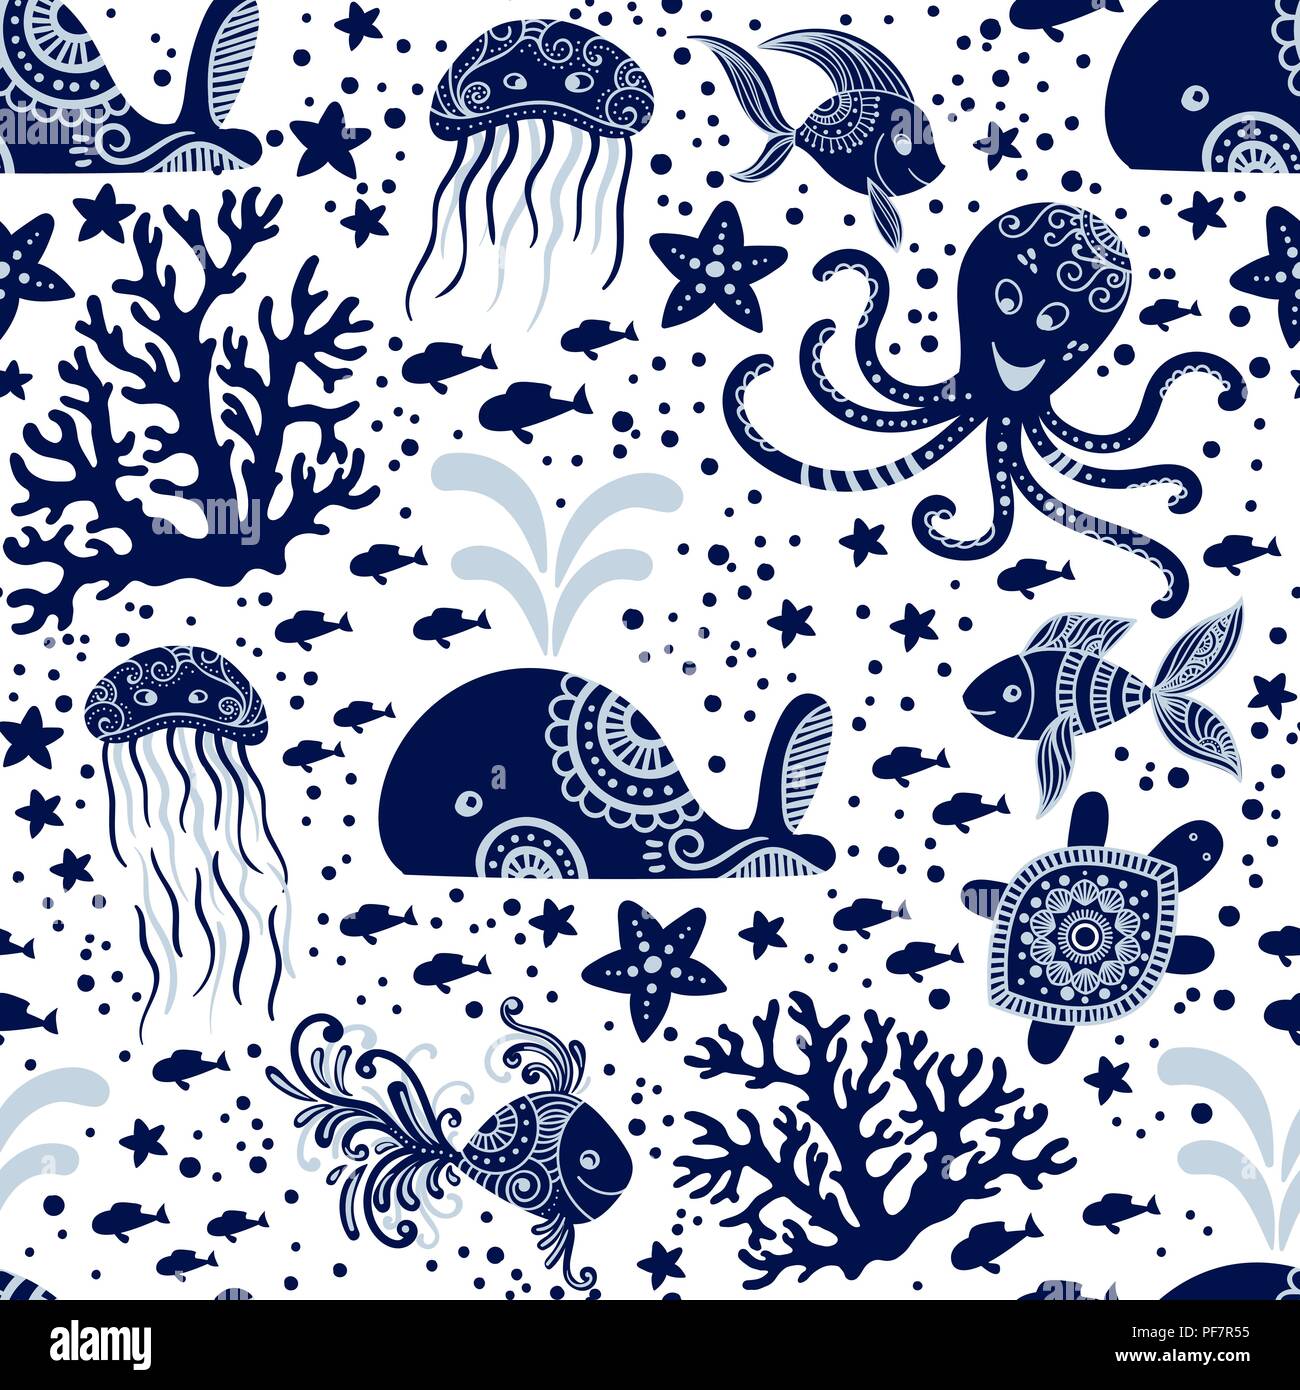 Seamless pattern with sea underwater animals. Cute cartoon jellyfish, octopus, starfish and turtles. Marine background for kids. Perfect for textile print, cloth design and fabric Stock Vector